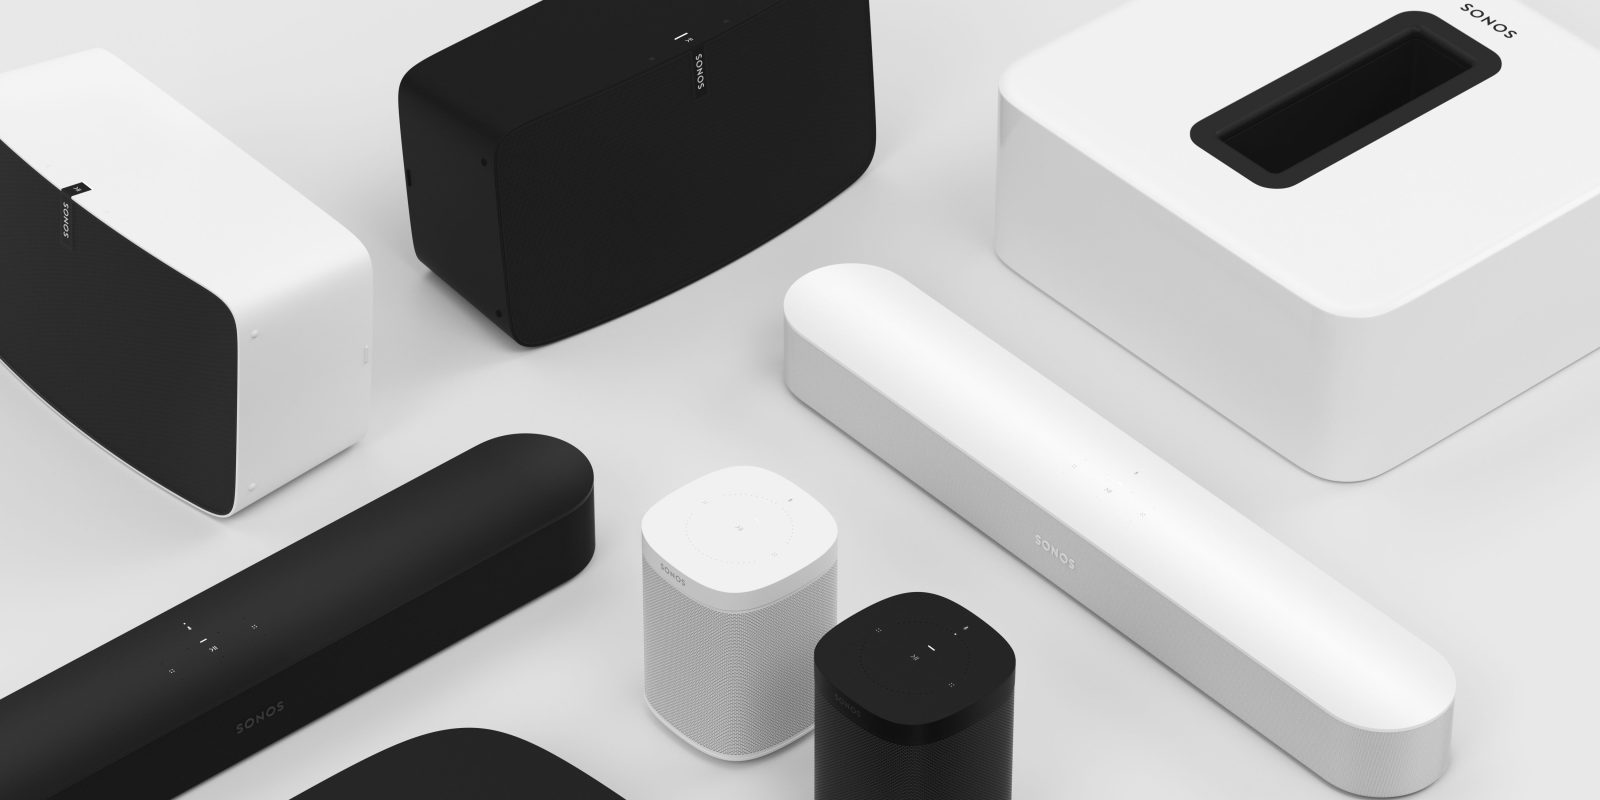 valg Mange metal Rumor: Sonos adopting Dolby Atmos with new Playbar, Play:5 and Sub updates  also on the way - 9to5Mac